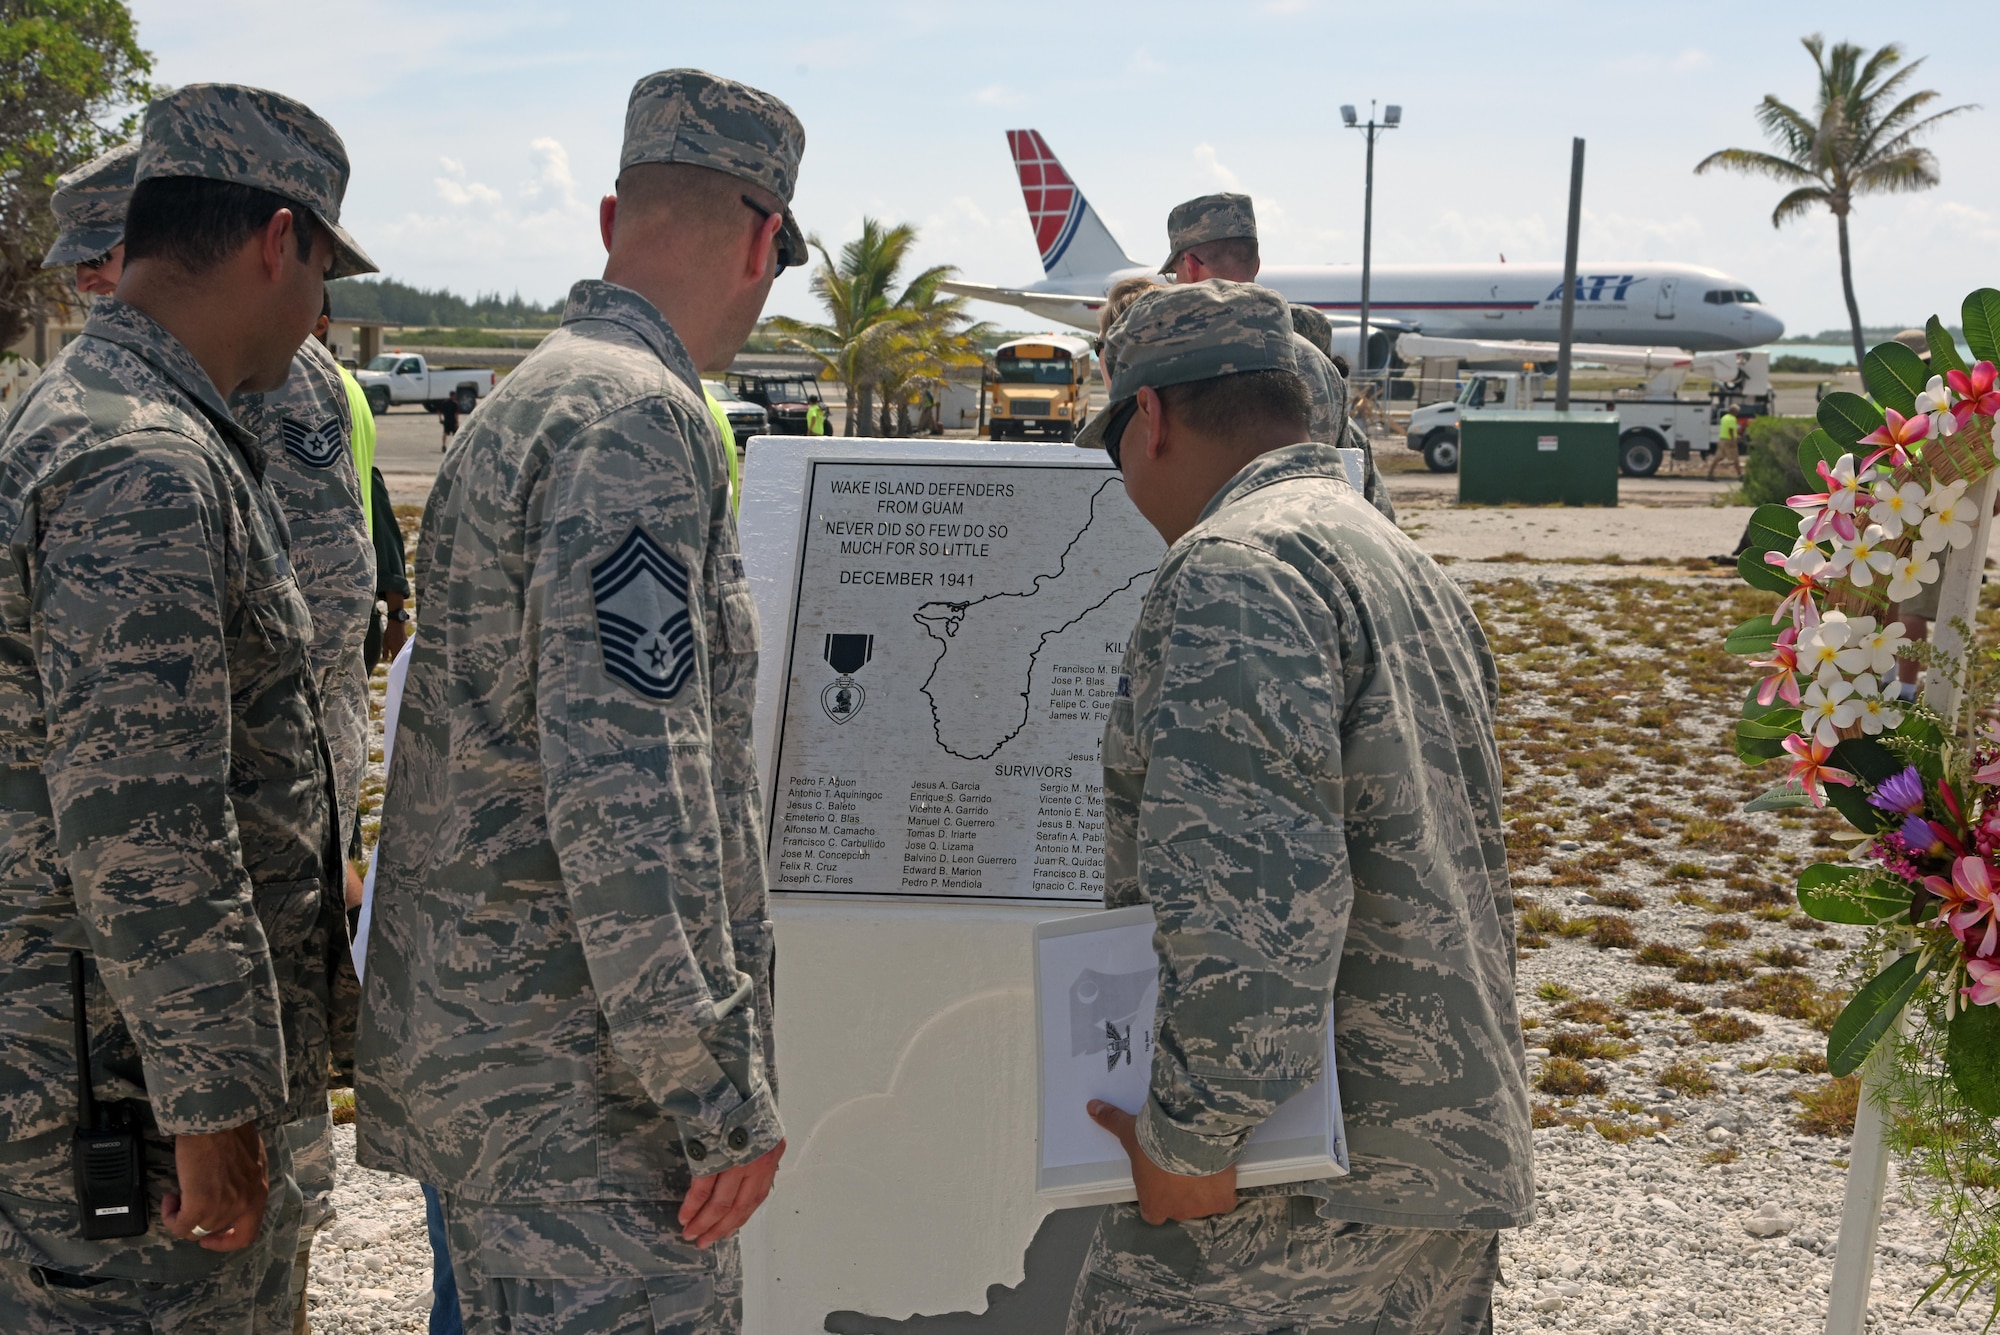 Col. Frank Flores (right), Pacific Air Forces Regional Support Center commander, Capt. Allen Jaime (left), Wake Island Det. 1 commander, PRSC, and Chief Master Sgt. David Boerman (middle), PRSC superintendent, admire the newly renovated memorial during the Guam Memorial rededication ceremony June 8, 2017. The Guam Memorial on Wake Island was erected in 1991 to honor 45 Chamorros from Guam who worked for Pan American airlines. On Dec. 8, 1941, just a few hours of the attack on Pearl Harbor, Hawaii, Japanese forces attacked Wake Island and 10 of the 45 Chamorros were killed in the attack. The remaining 35 men were sent to prison camps in Japan and China where two died in captivity. Due to decades of corrosion, heat and sun, the memorial was degraded to the point where it became unreadable. During many months in 2017, the Guam Memorial was renovated to its original glory.